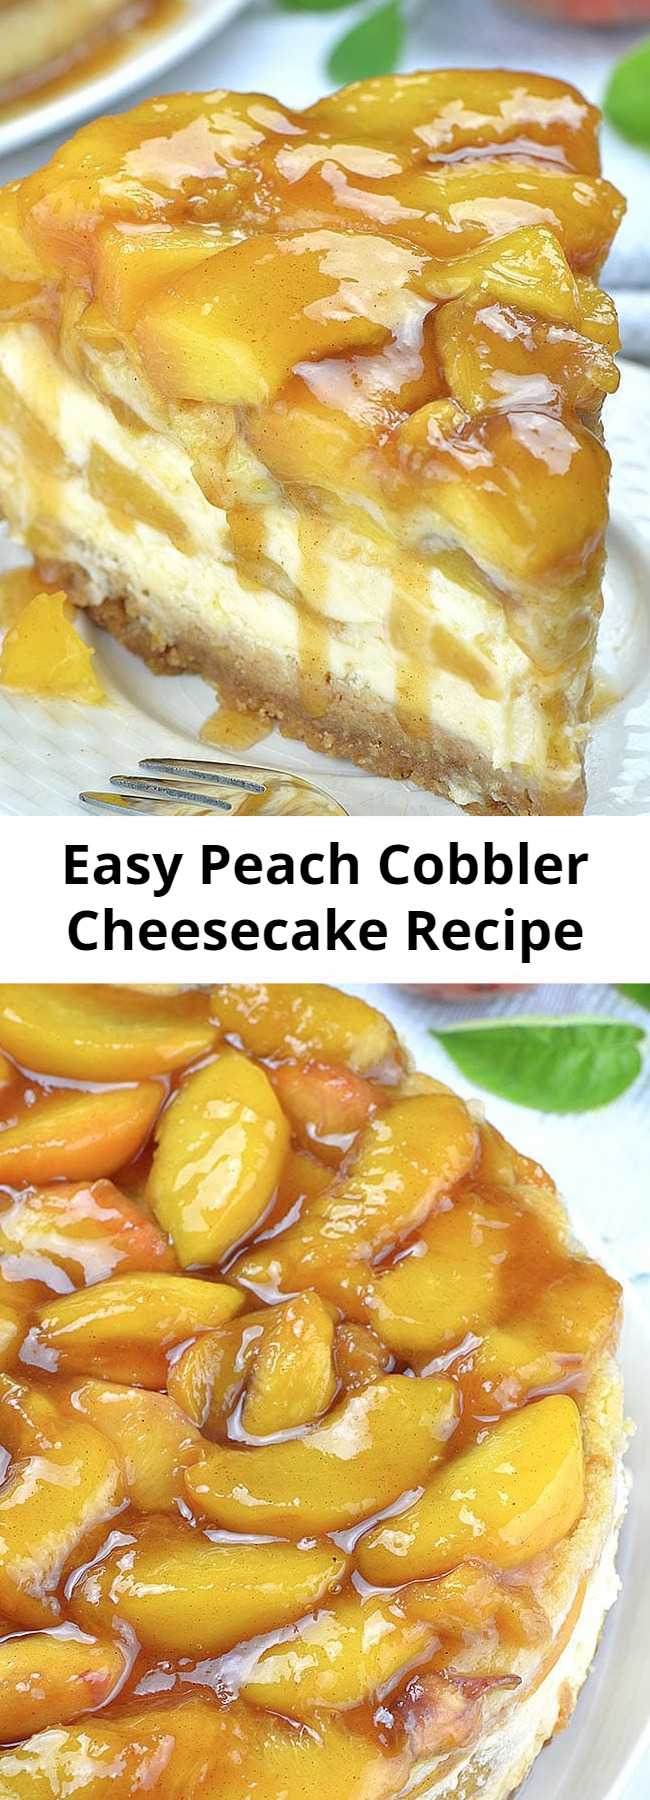 Easy Peach Cobbler Cheesecake Recipe - Peach Cobbler Cheesecake is the most amazing combo of creamy New York Style Cheesecake and classic southern Peach Cobbler, packed into one decadent dessert. It sounds melt-in-your-mouth-good, right? This cheesecake topped with peaches has everything you love about summery peach cobbler and cheesecake, and it’s all in one easy dessert recipe!  #cheesecake #peachcobbler 